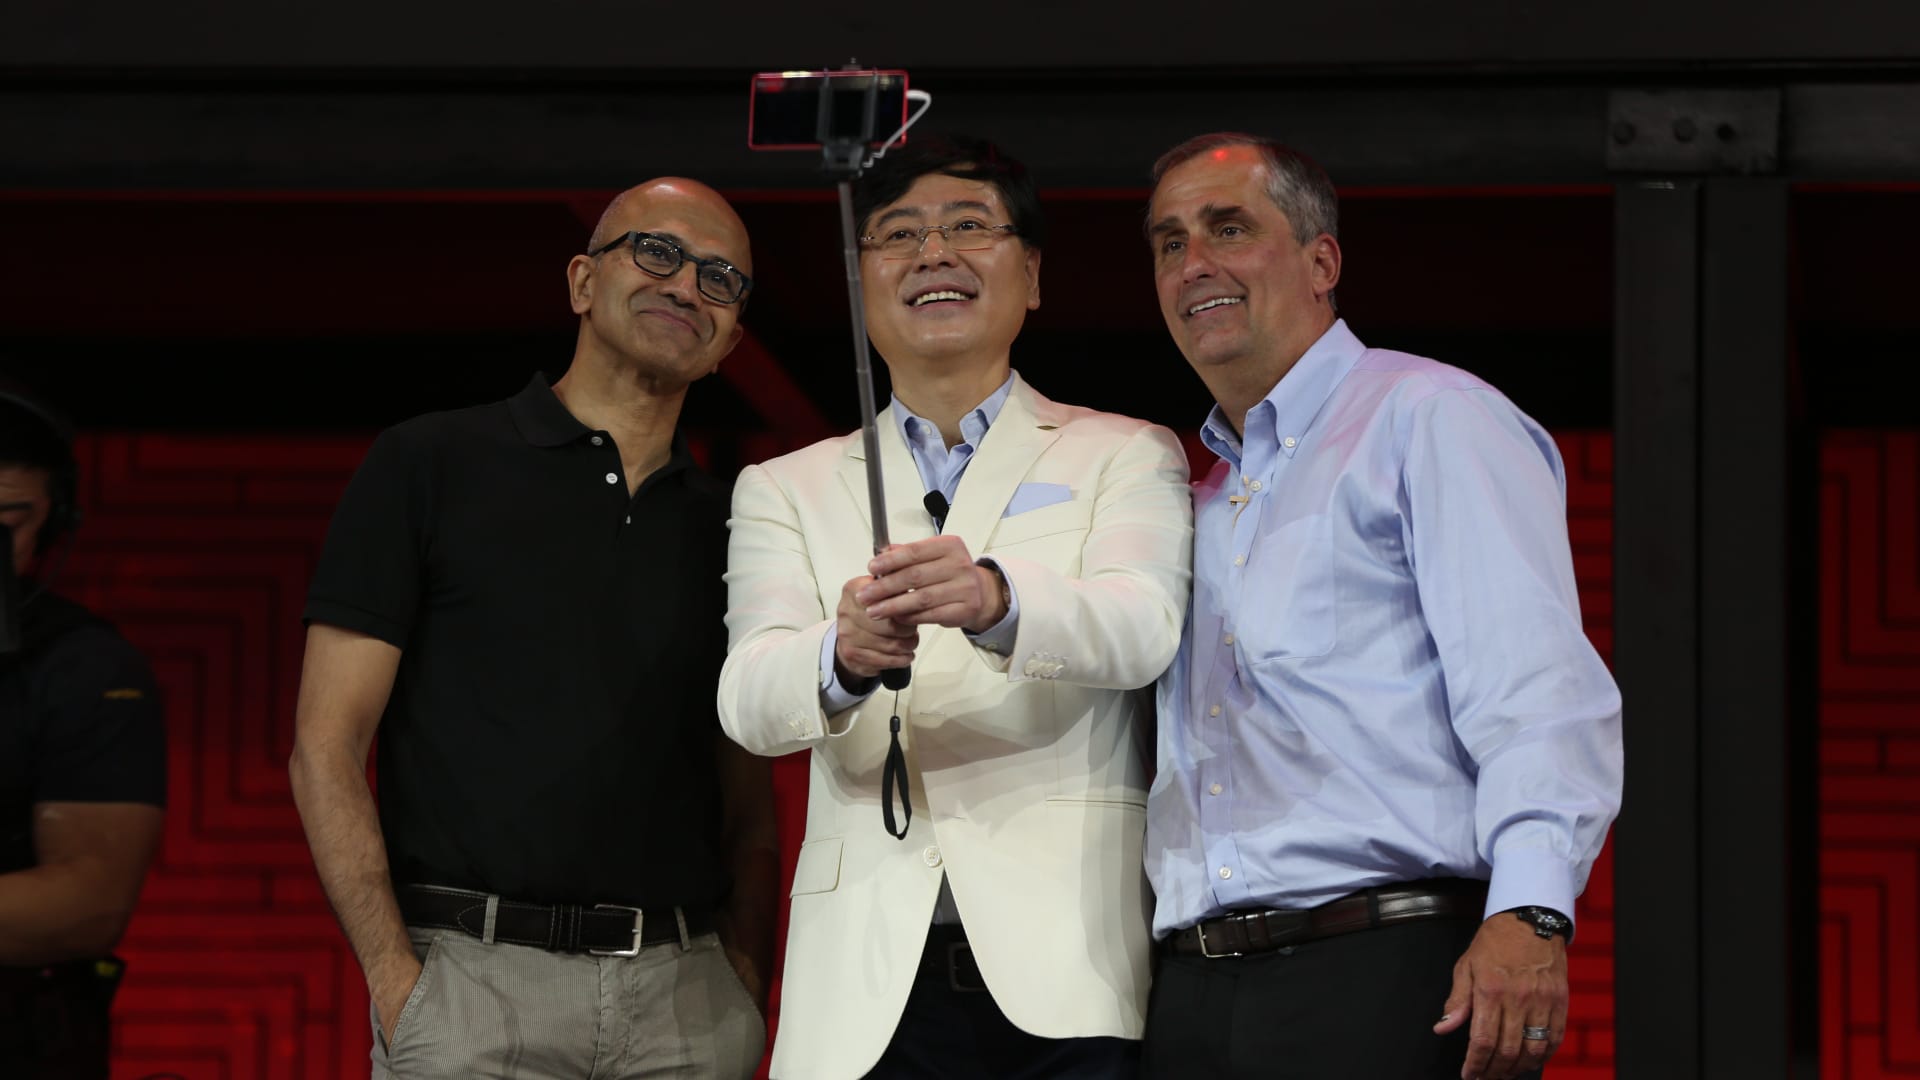 Lenovo Chairman and CEO Yang Yuanqing, center, takes a selfie with Microsoft CEO Satya Nadella, left, and then-Intel CEO Brian Krzanich during the Lenovo Tech World event at China National Convention Center on May 28, 2015 in Beijing. Lenovo launched a series of new products during the one-day event.